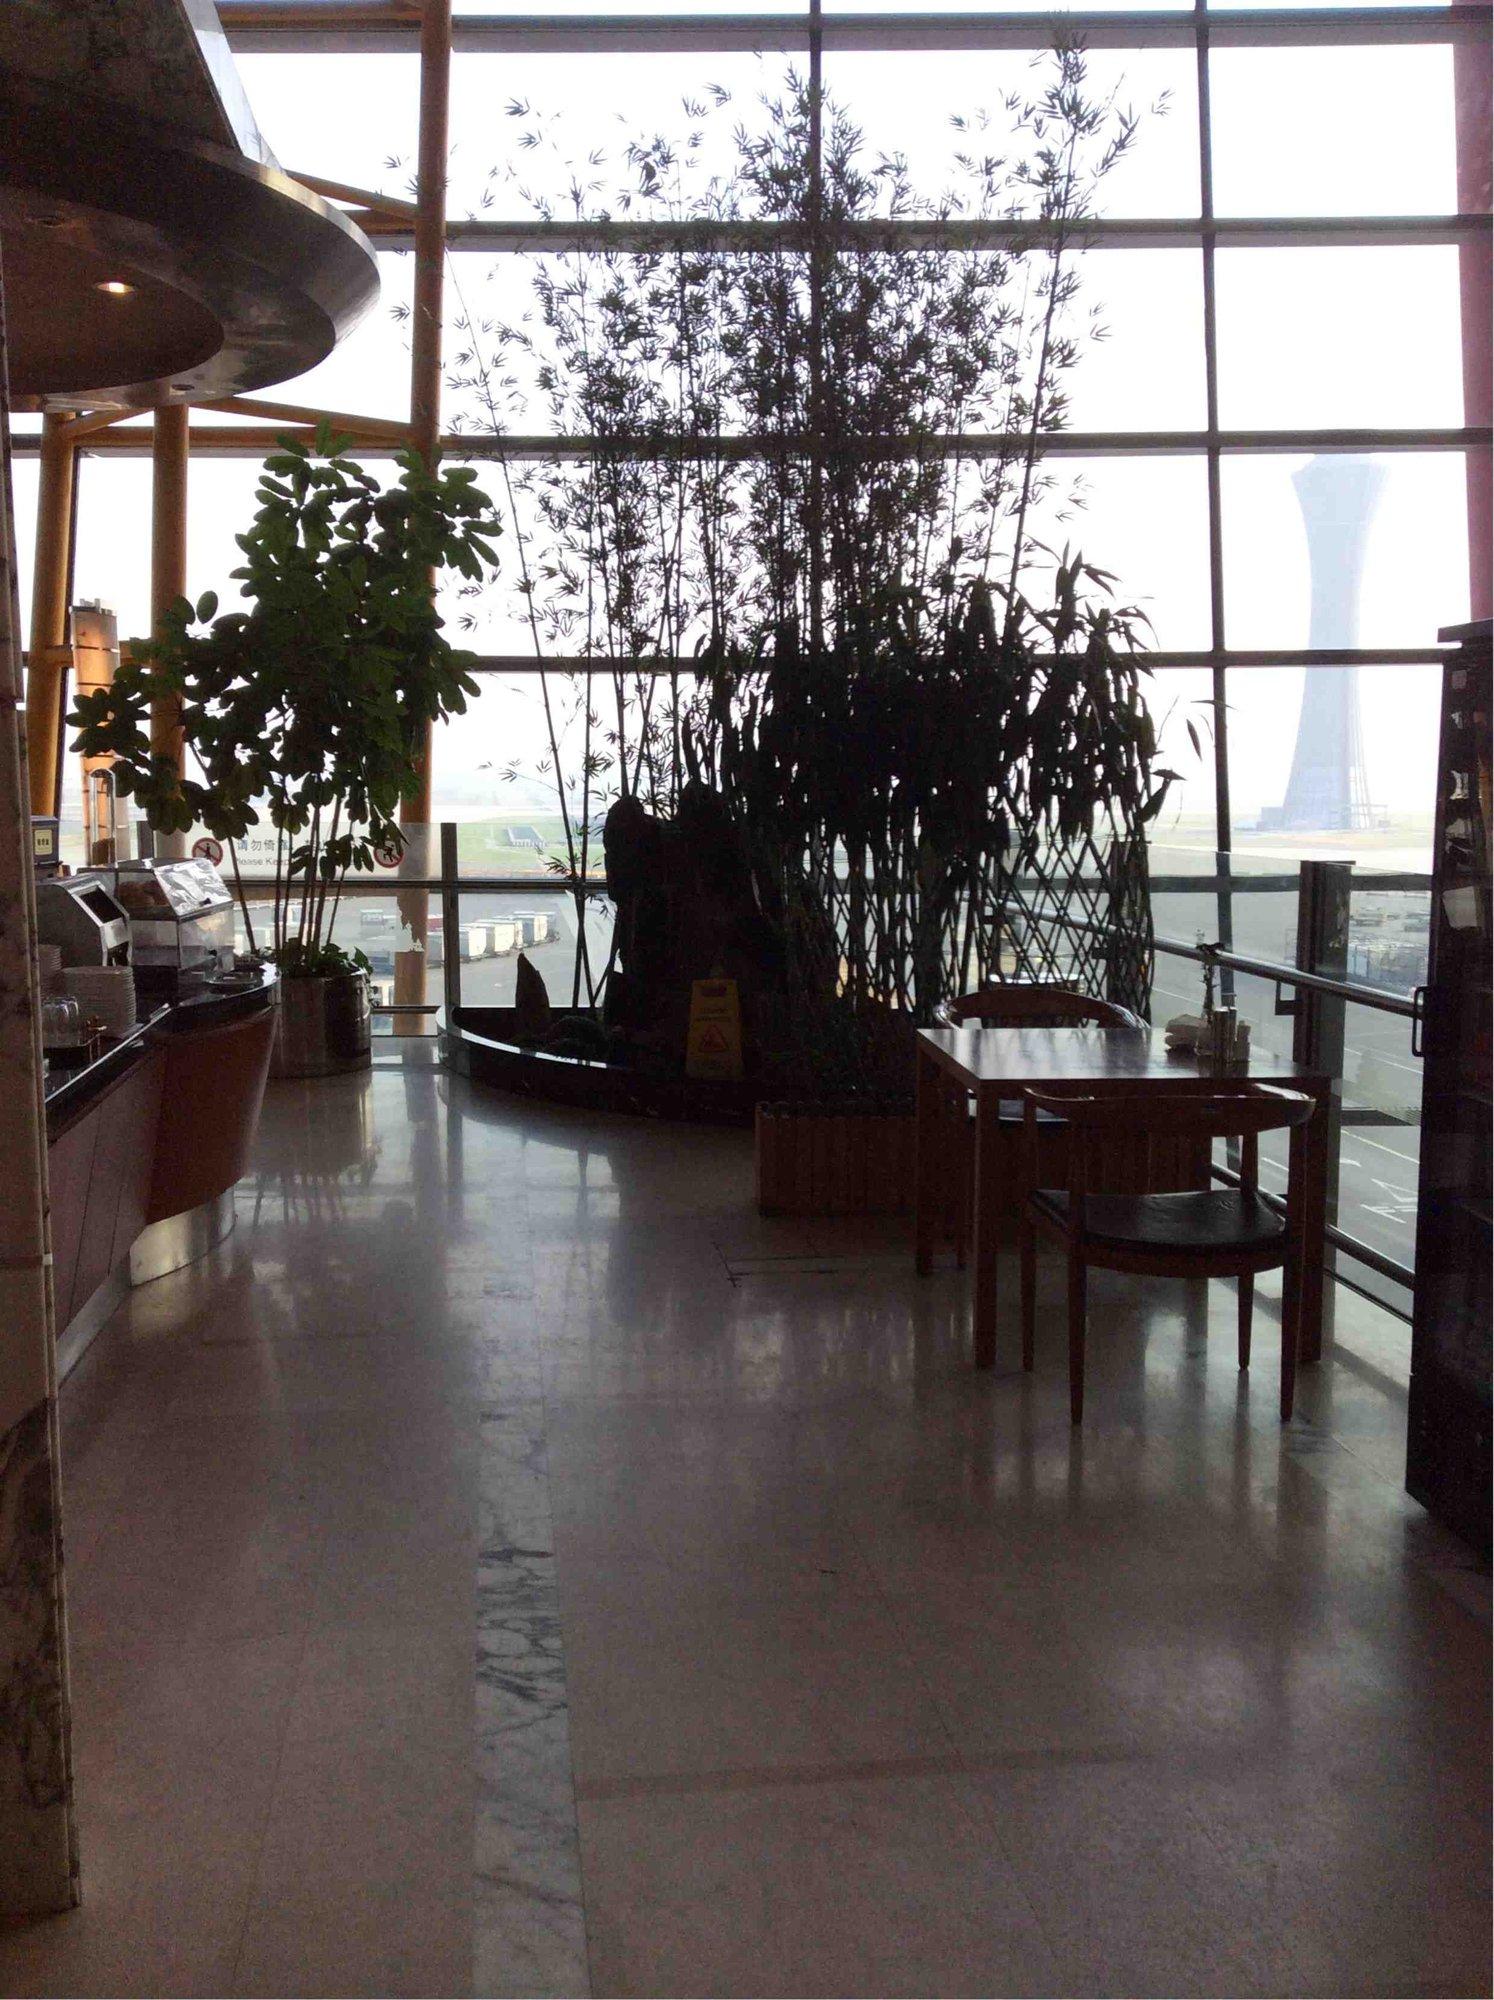 Air China International First Class Lounge image 33 of 38